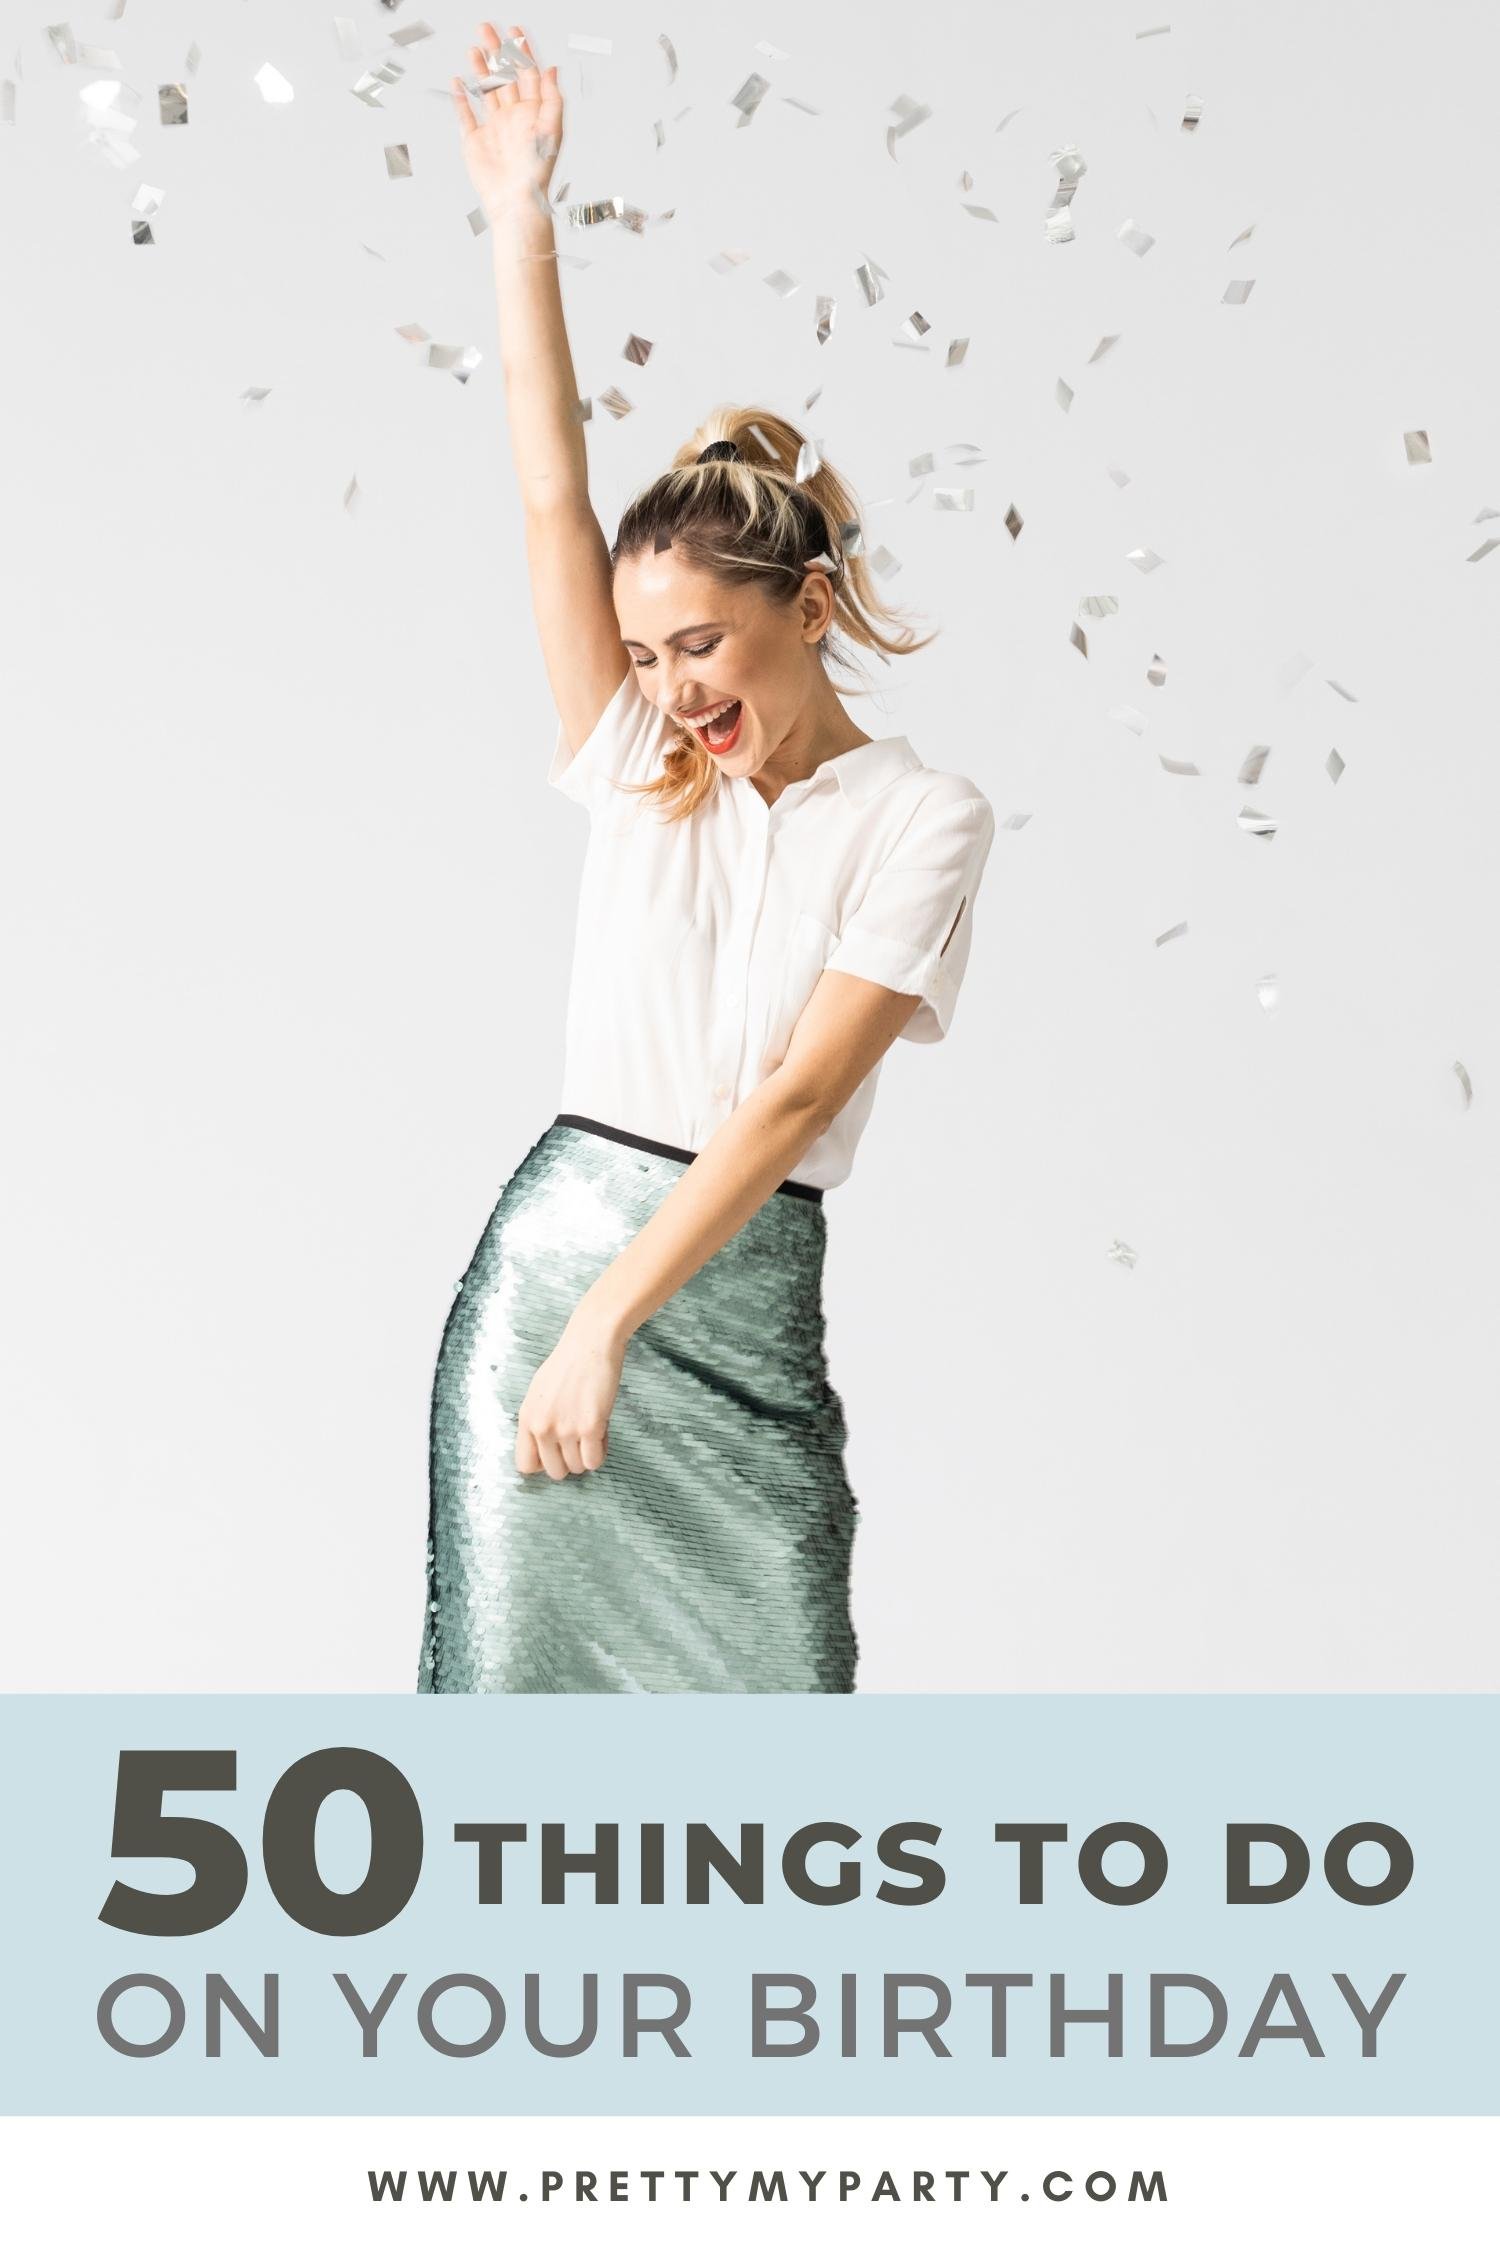 50 best things to do on your birthday when you're out of ideas